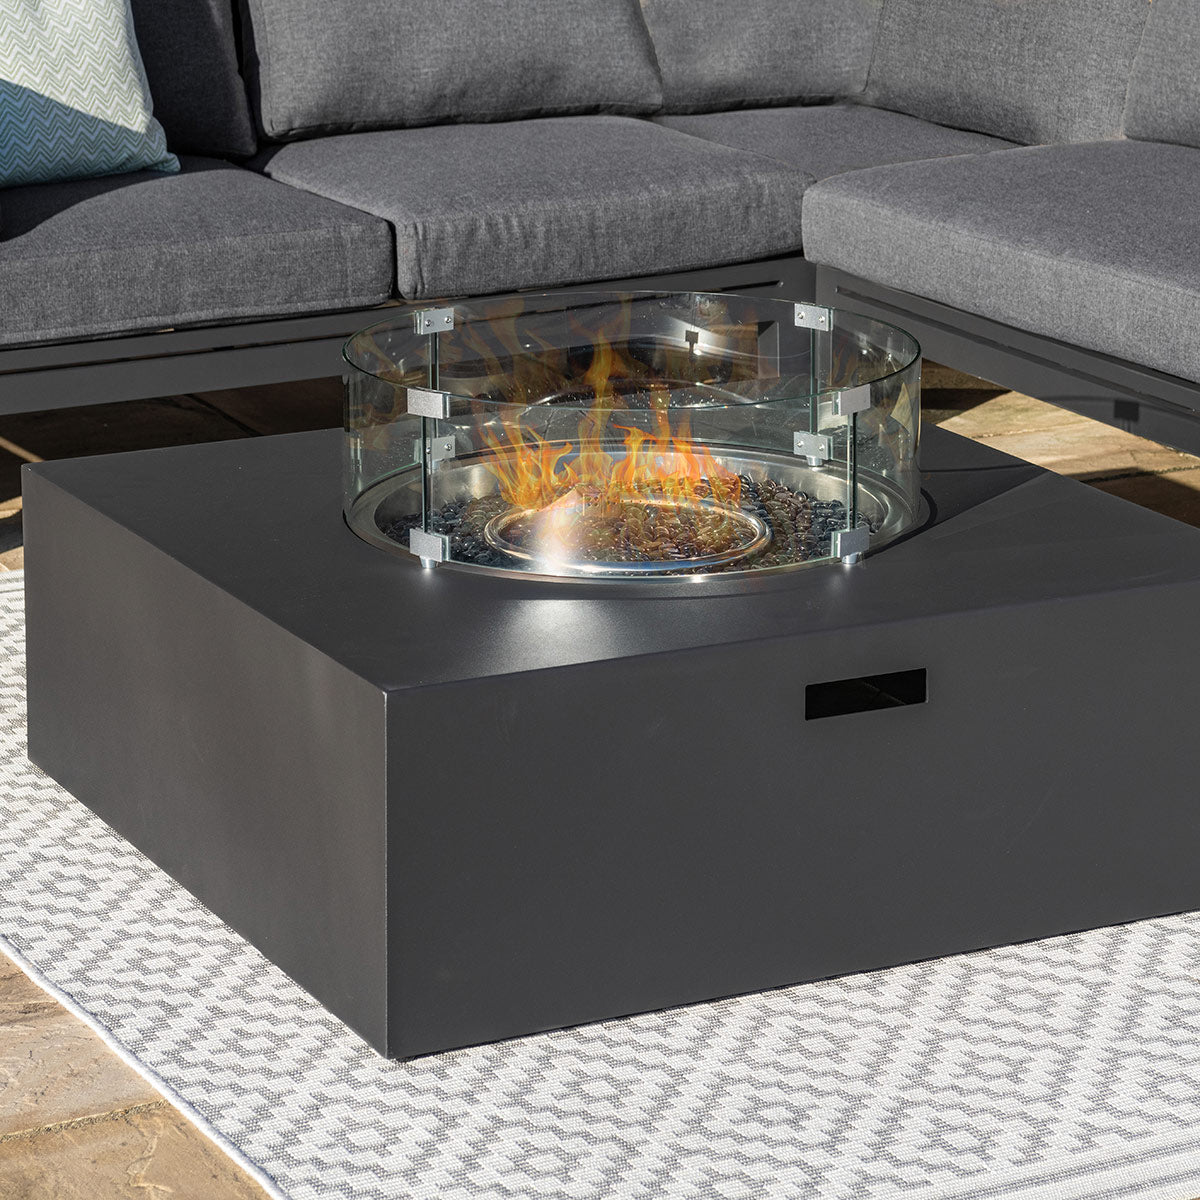 Maze - Oslo Large Aluminium Corner Group with Square Gas Fire Pit Table - Grey